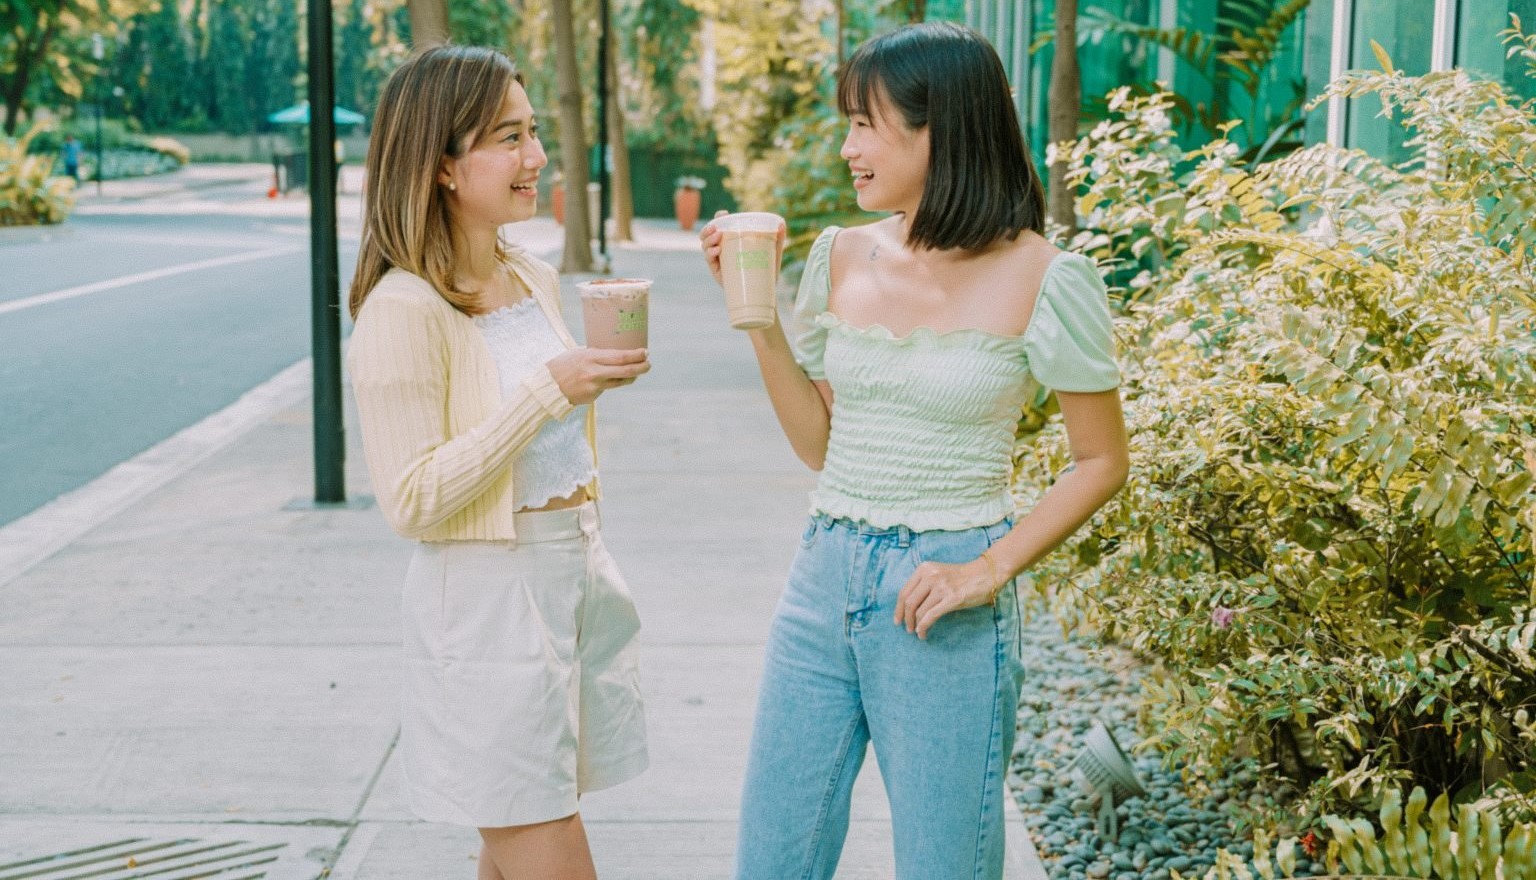 Women looking at each other holding Pickup coffee cups